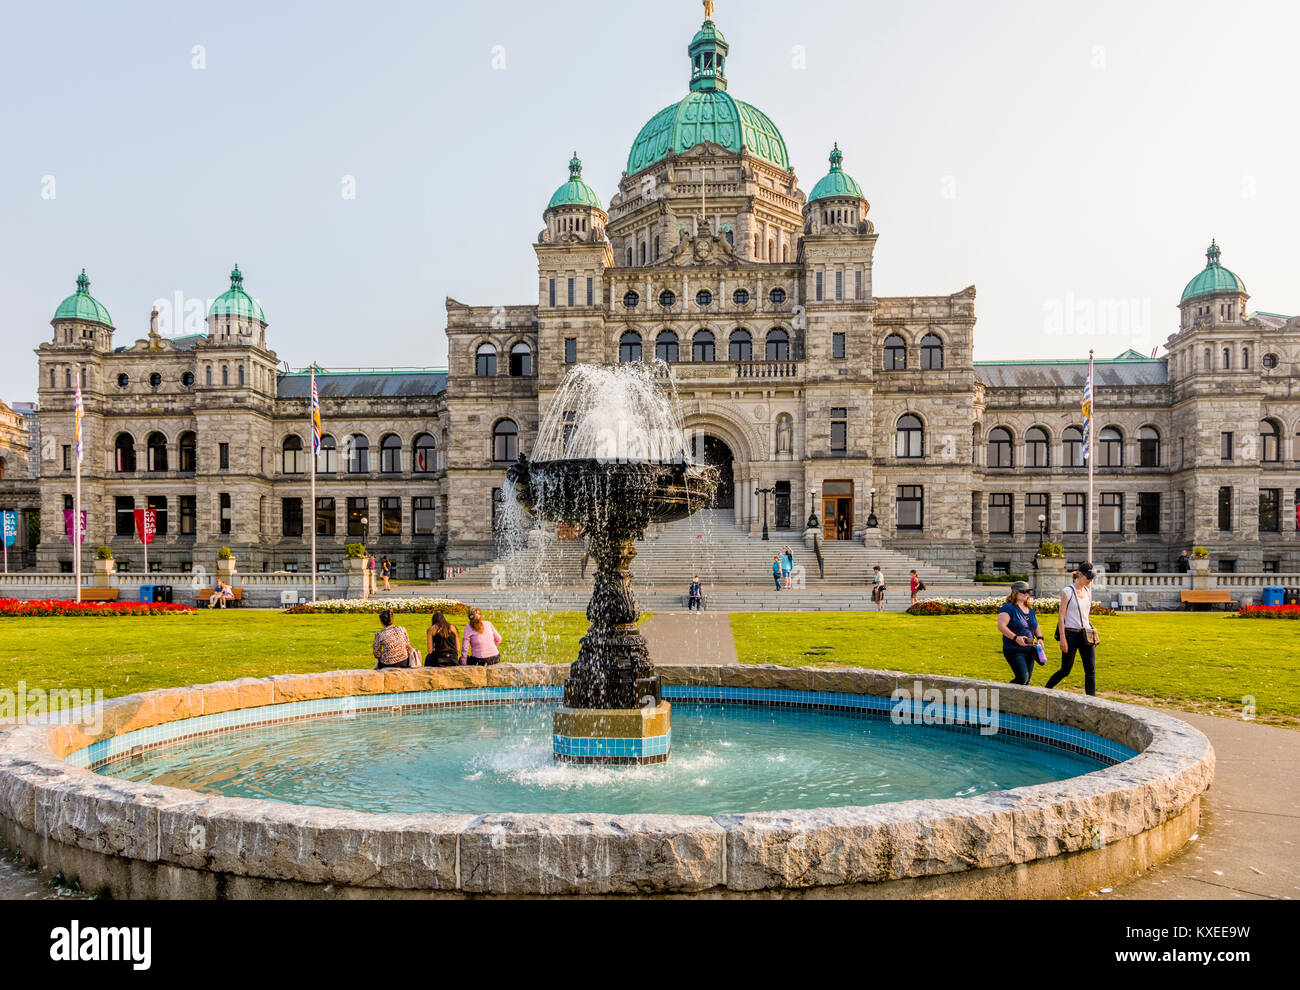 The British Columbia Parliament Building in Victoria known as the Garden City on Vancouver Island in British Columbia, Canada Stock Photo